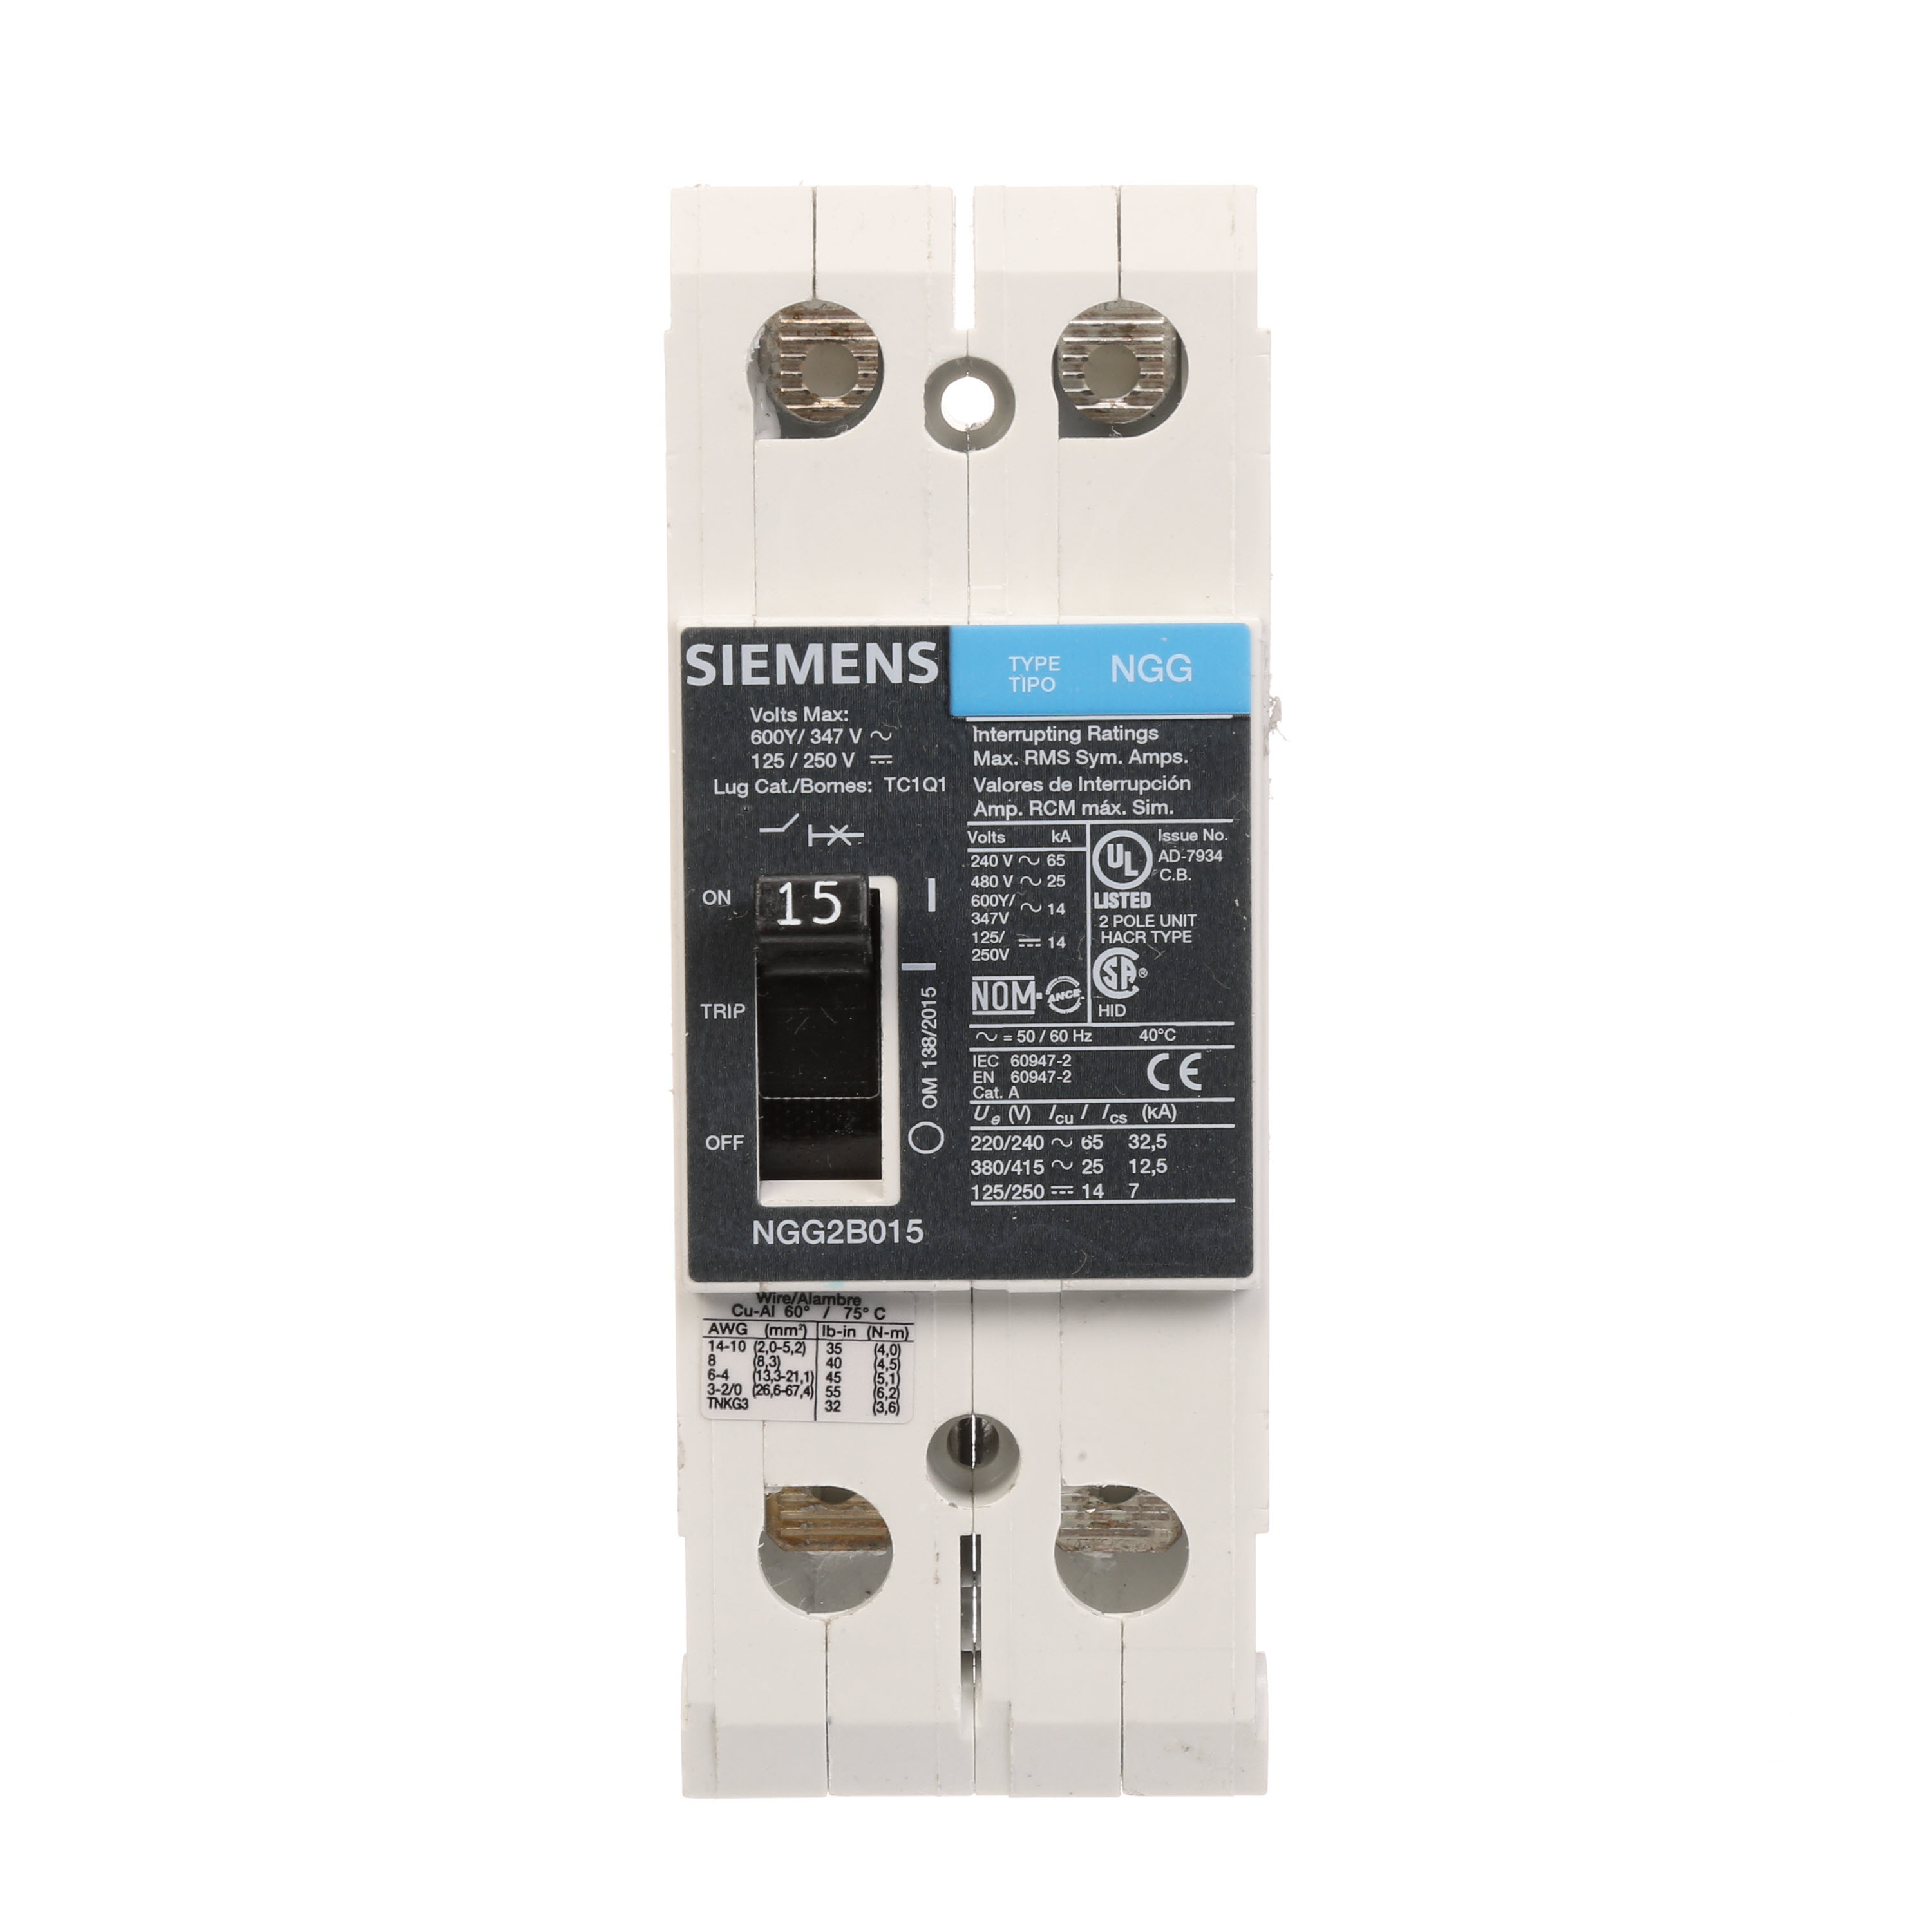 SIEMENS LOW VOLTAGE G FRAME CIRCUIT BREAKER WITH THERMAL - MAGNETIC TRIP. UL LISTED NGG FRAME WITH STANDARD BREAKING CAPACITY. 15A 2-POLE (14KAIC AT 600Y/347V)(25KAIC AT 480V). SPECIAL FEATURES MOUNTS ON DIN RAIL / SCREW, NO LUGS. DIMENSIONS (W x H x D) IN 2 x 5.4 x 2.8.